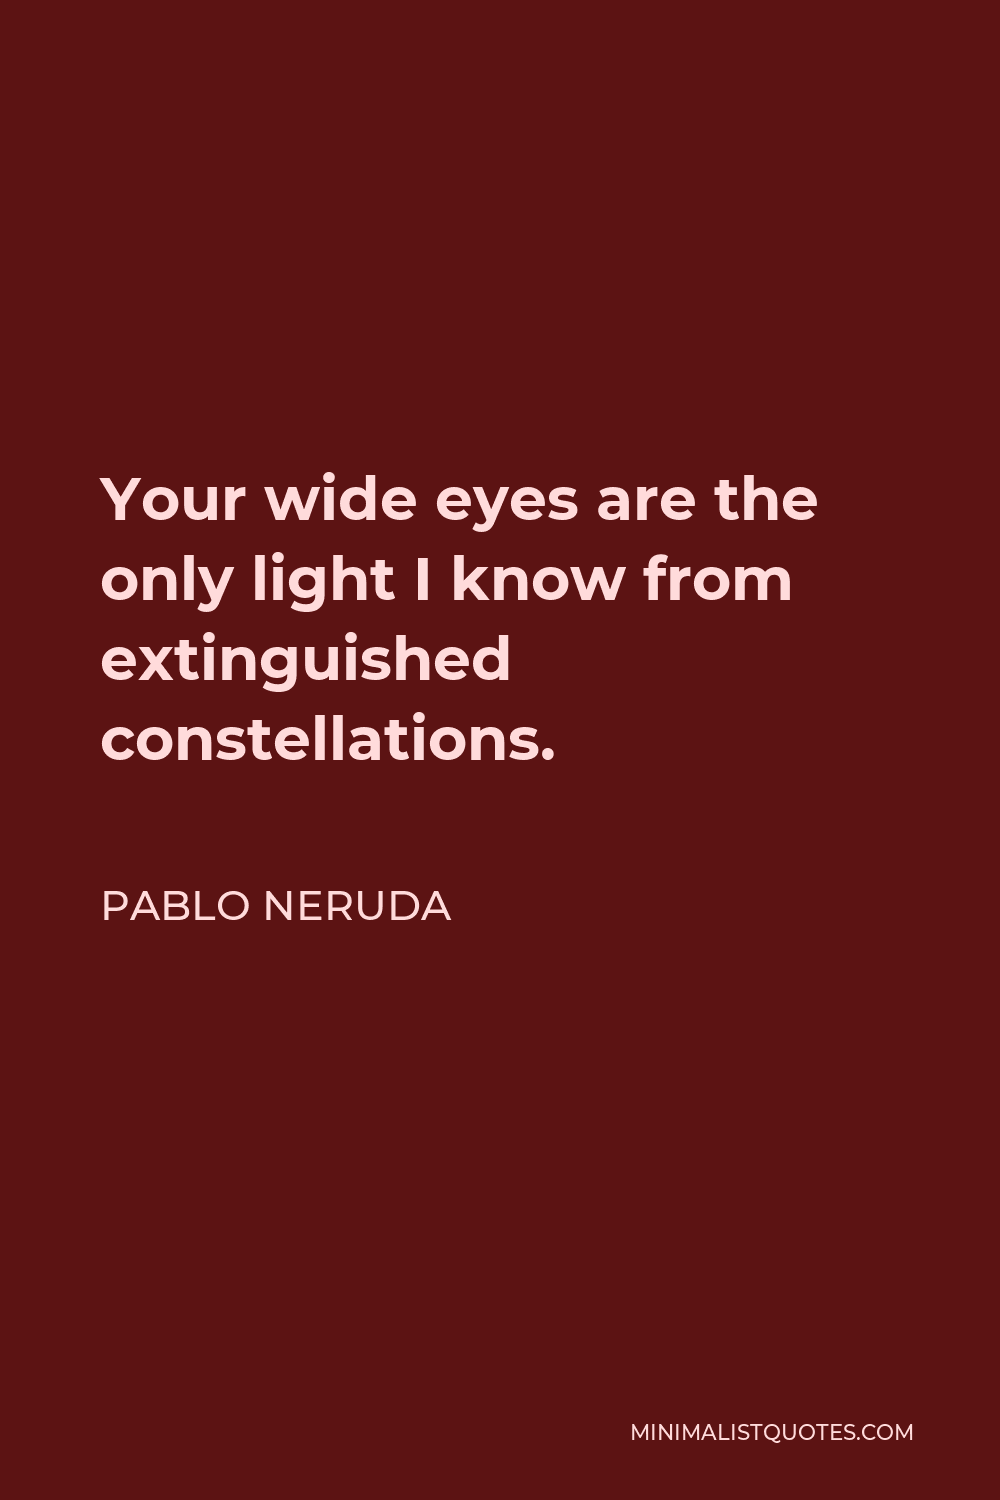 Pablo Neruda Quote - Your wide eyes are the only light I know from extinguished constellations.